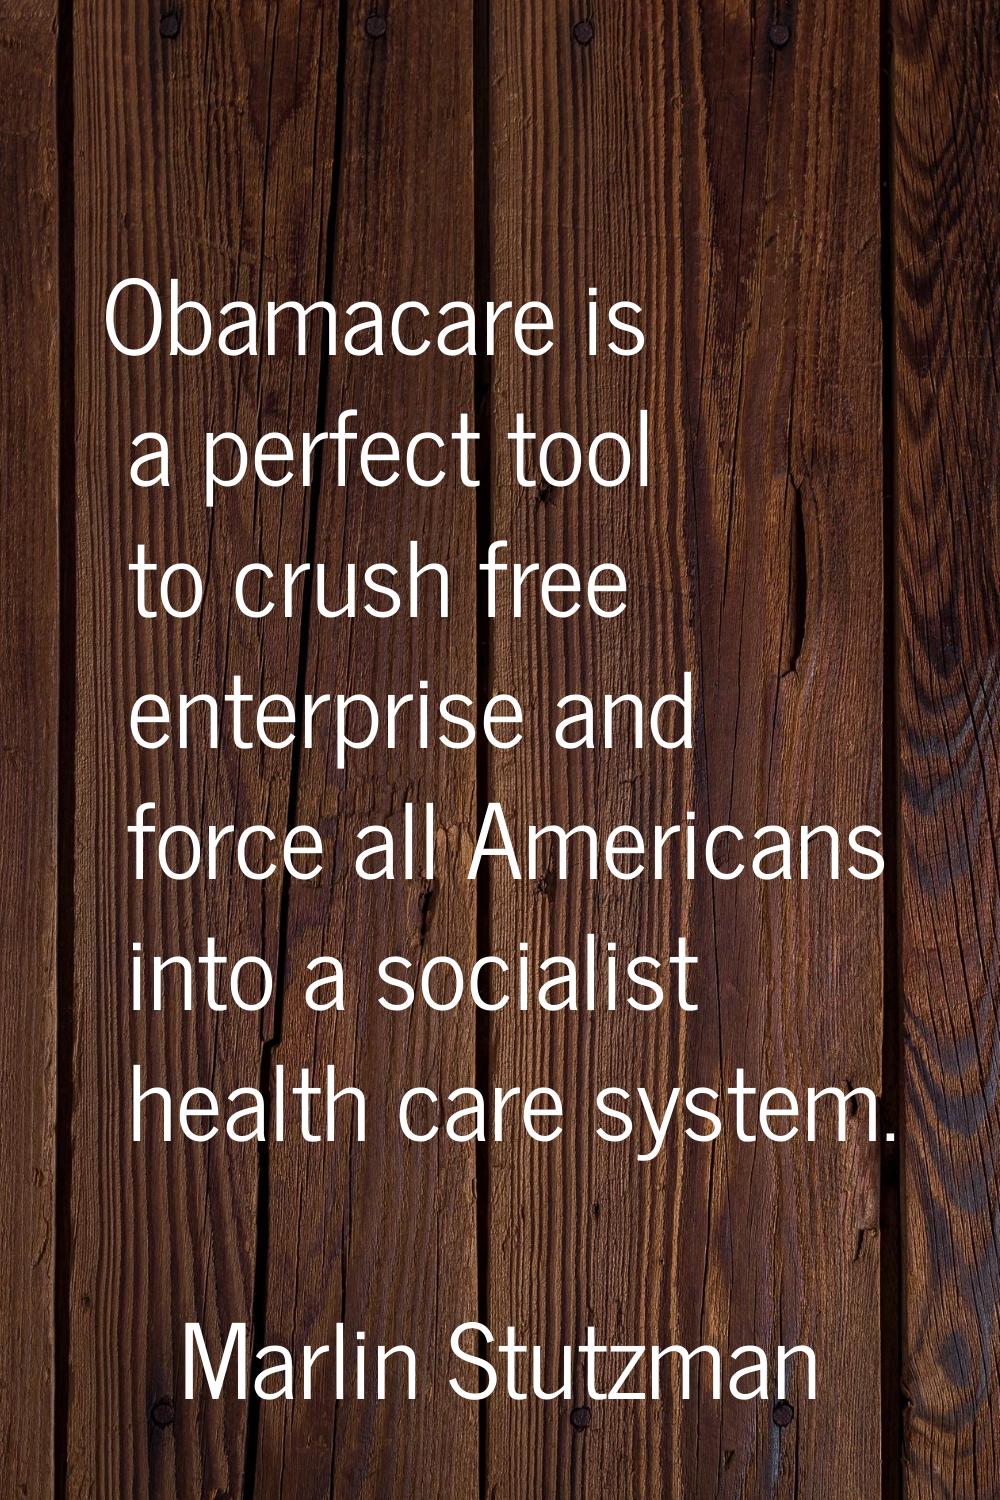 Obamacare is a perfect tool to crush free enterprise and force all Americans into a socialist healt